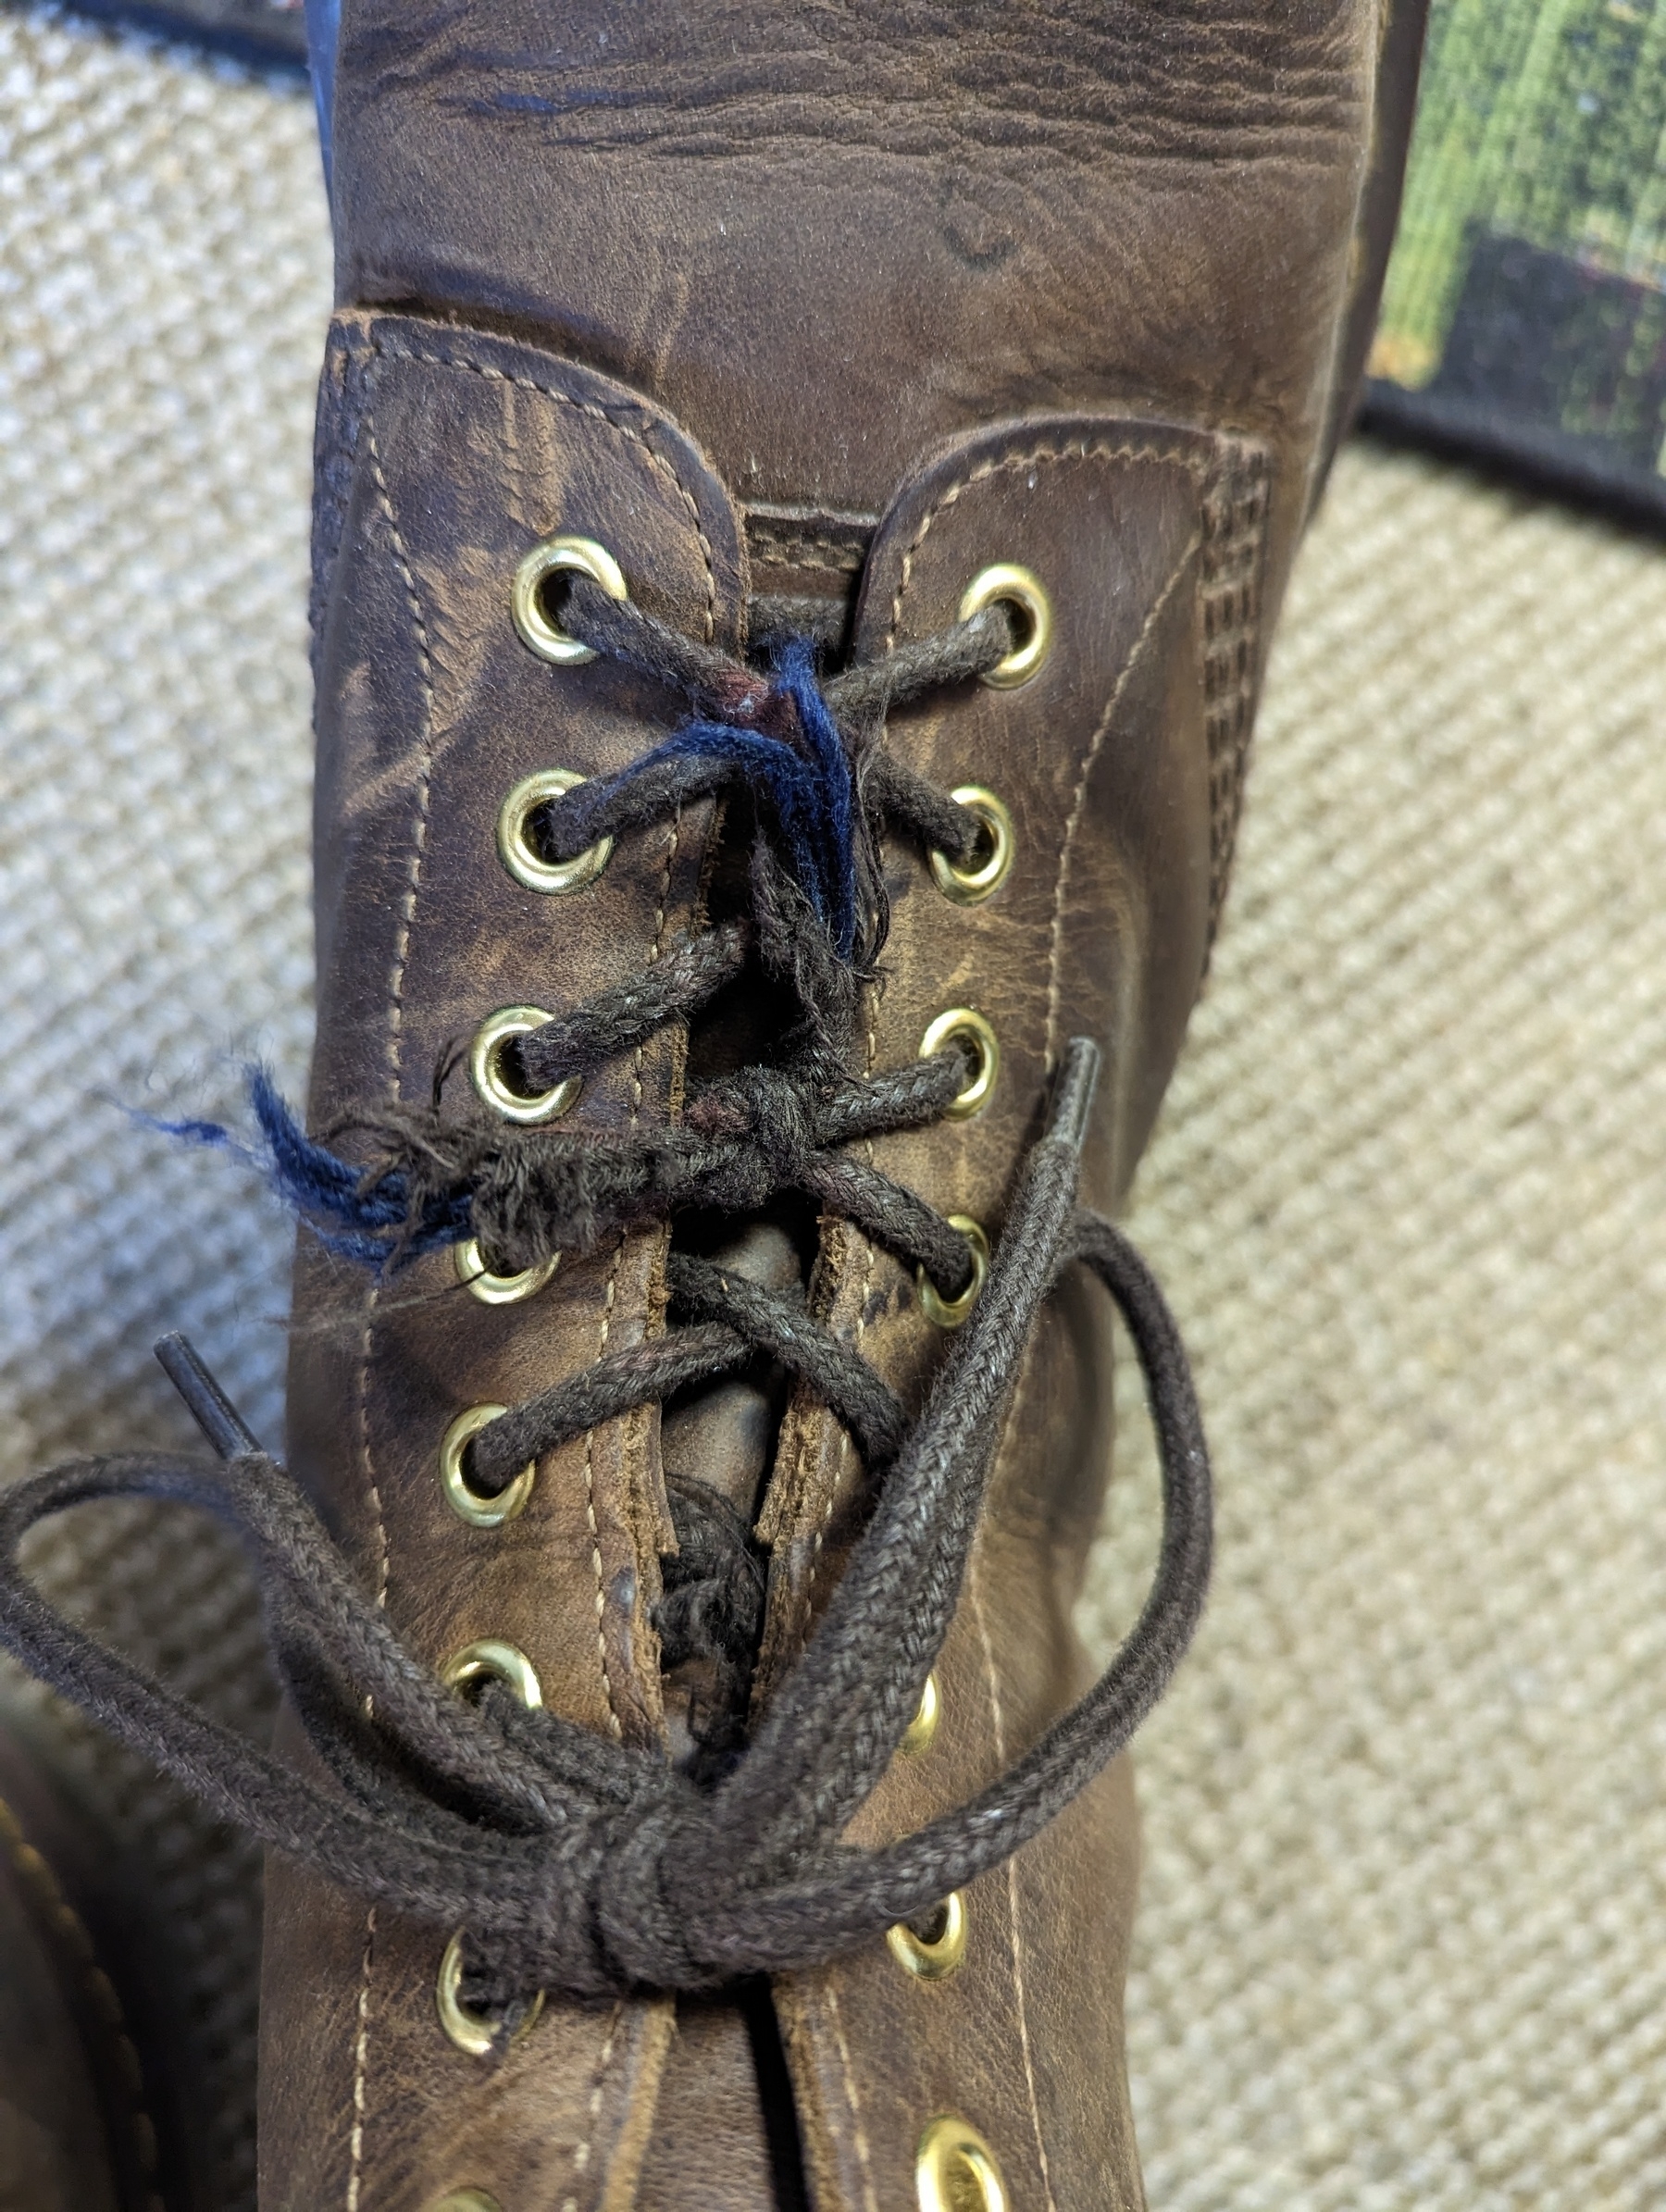 Broken boot laces secured with multiple knots